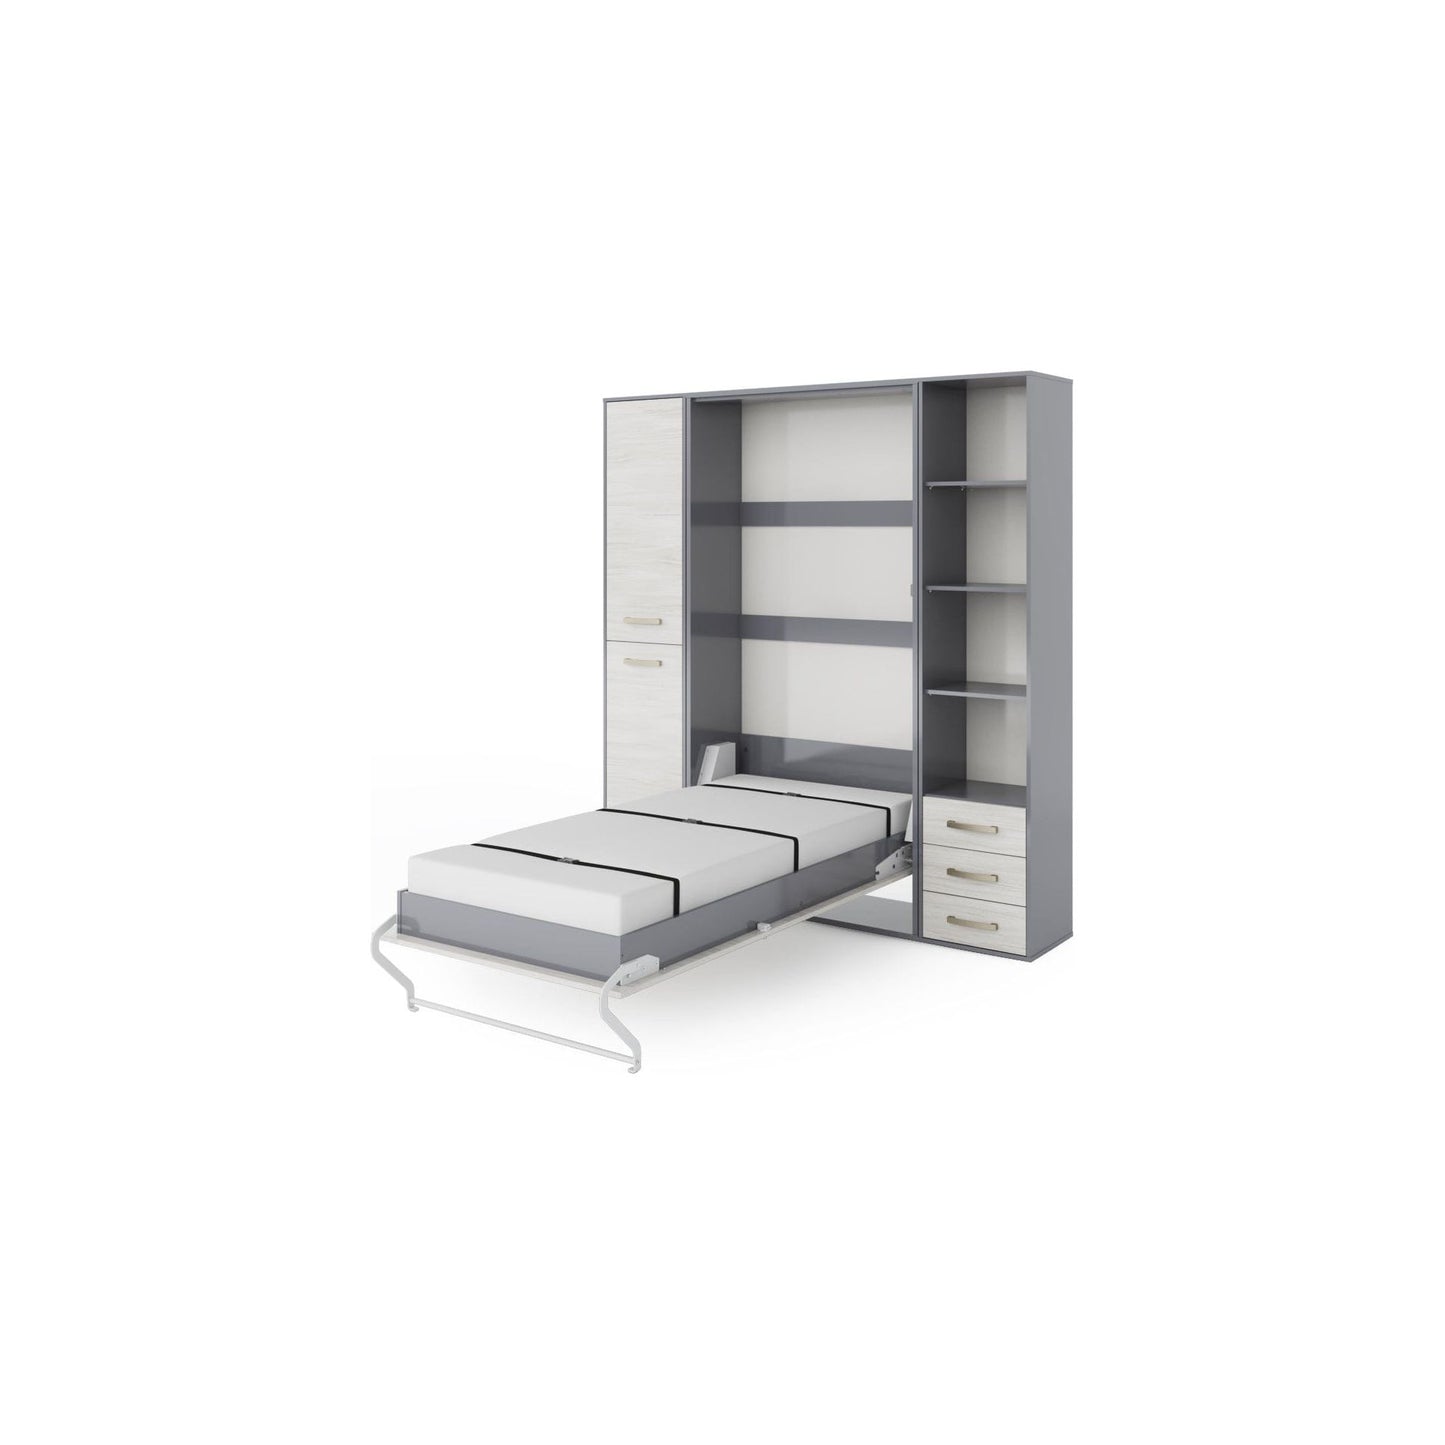 Maxima House Maxima House Invento Vertical Wall Bed, European Full XL Size with 2 cabinets